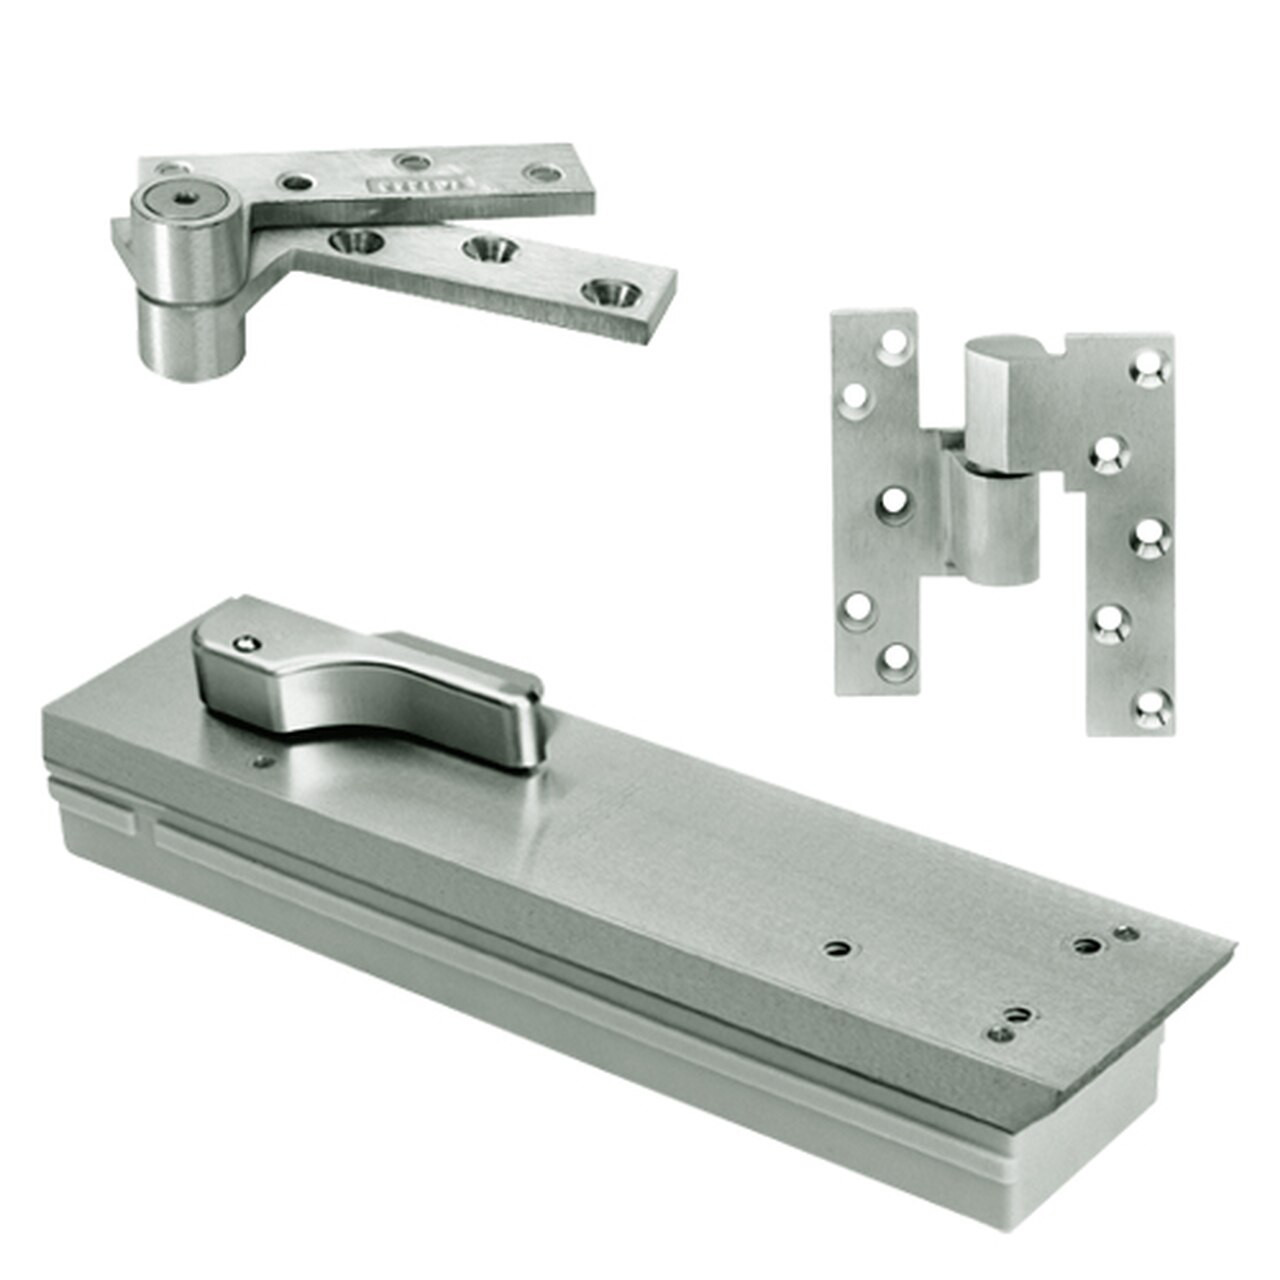 FQ5104NBC-LCC-RH-619 Rixson Q51 Series Fire Rated 3/4" Offset Hung Shallow Depth Floor Closers in Satin Nickel Finish